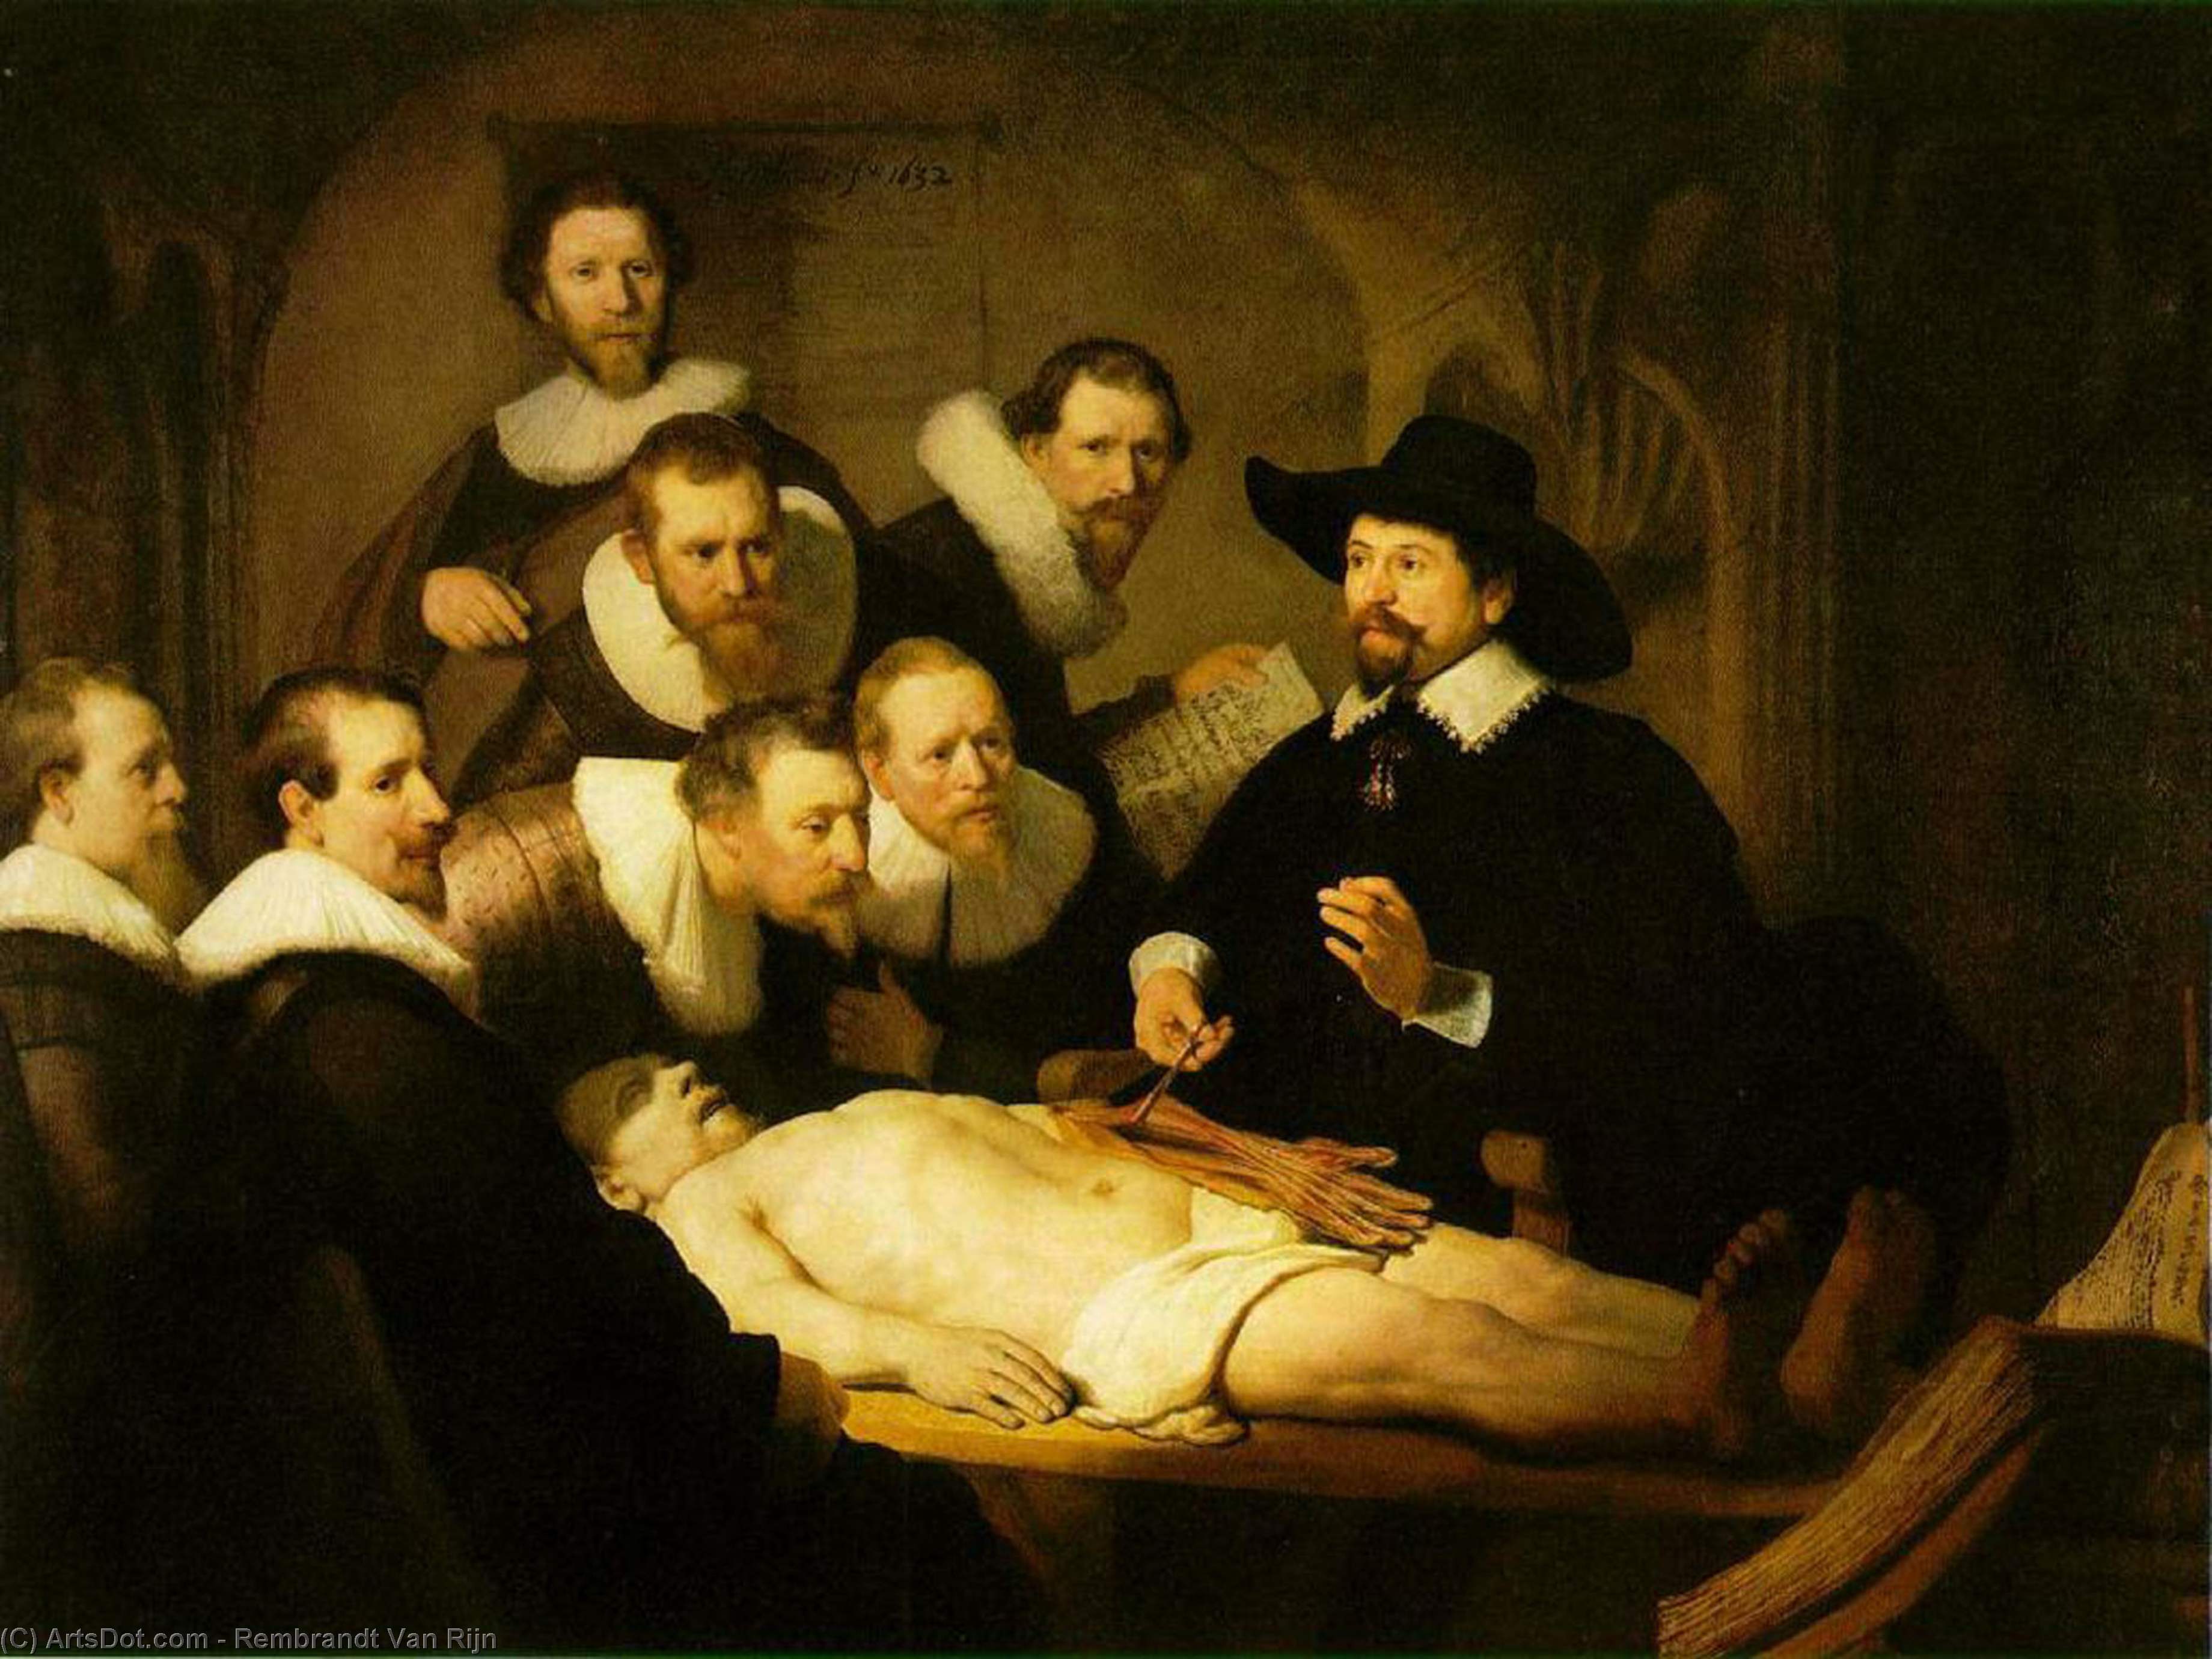 Order Oil Painting Replica The Anatomy Lecture of Dr. Nicolaes Tulp [1632], 1632 by Rembrandt Van Rijn (1606-1669, Netherlands) | ArtsDot.com